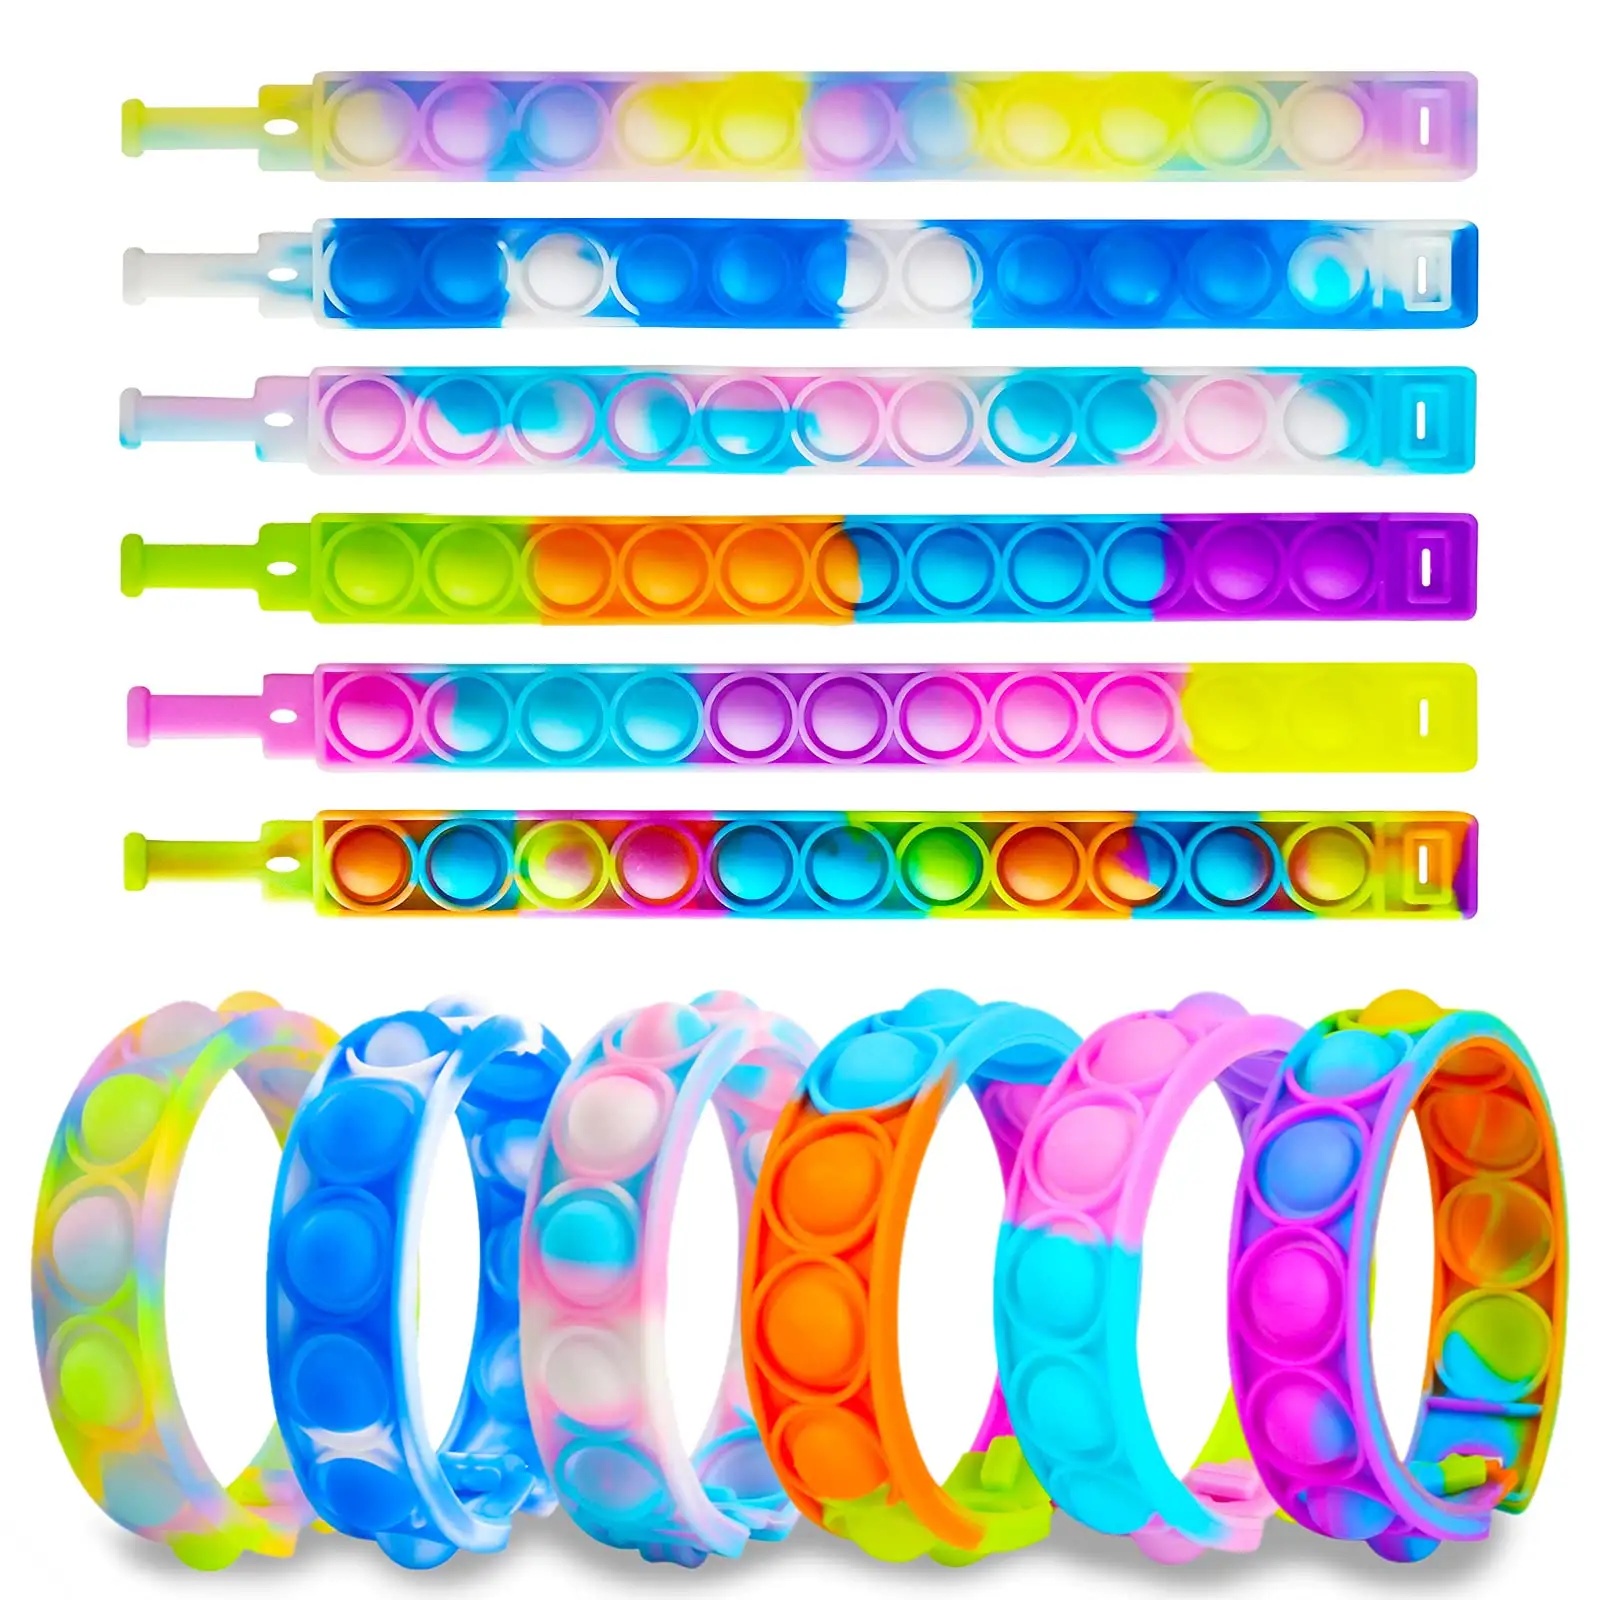 Autism Adhd Children Simple Dimple Fidget Anti Stress Relief Colorful Silicone Bracelet Anxiety Sensory Pops Bubble Toy